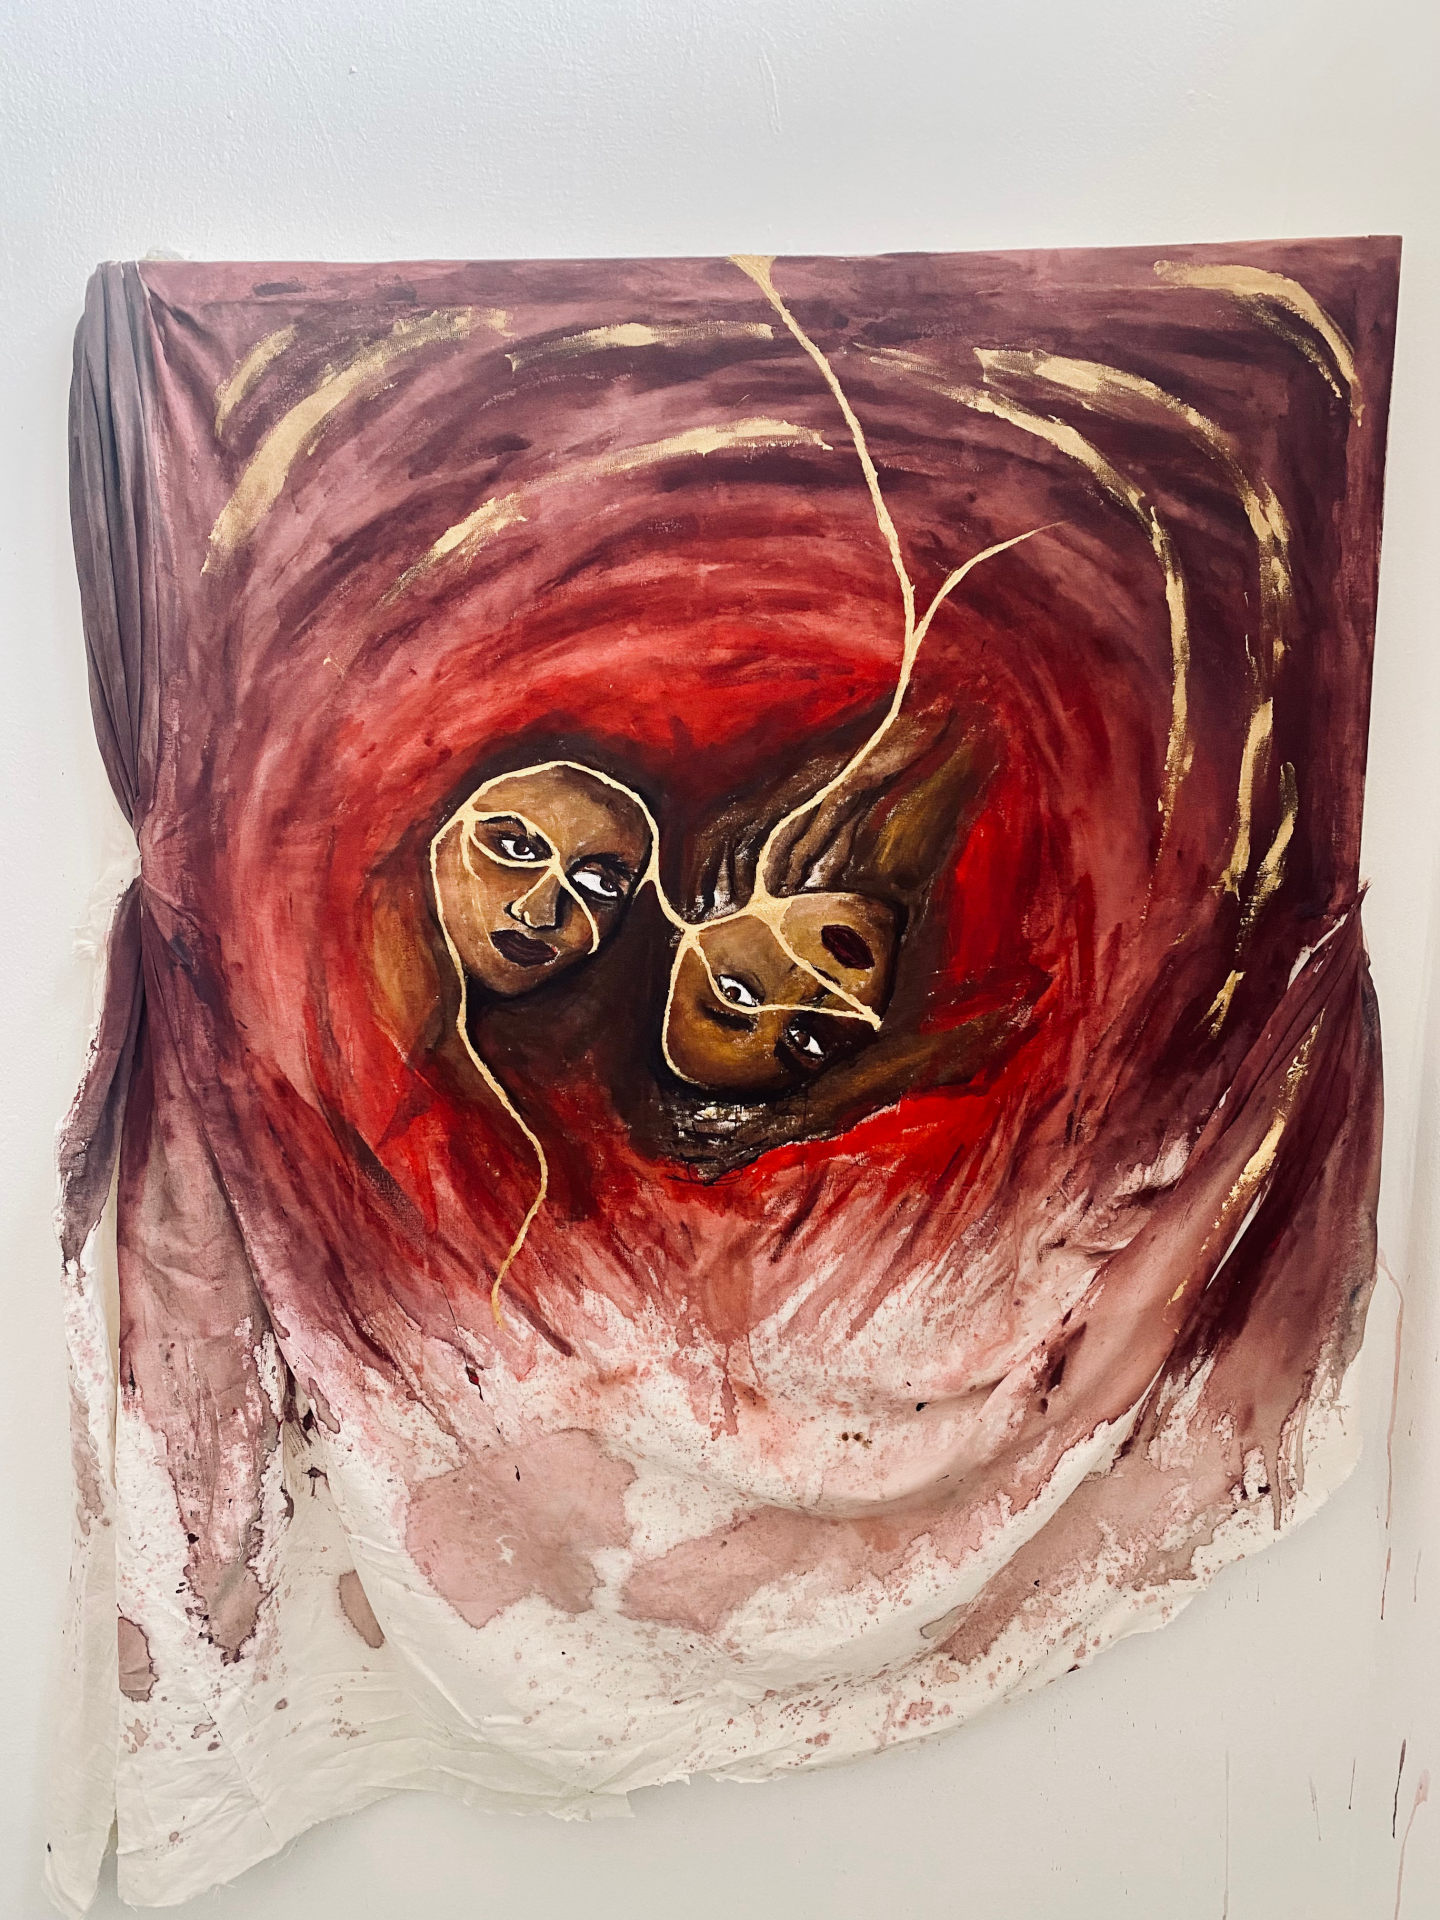 Sculpture of two female faces bound inside flesh-like canvas